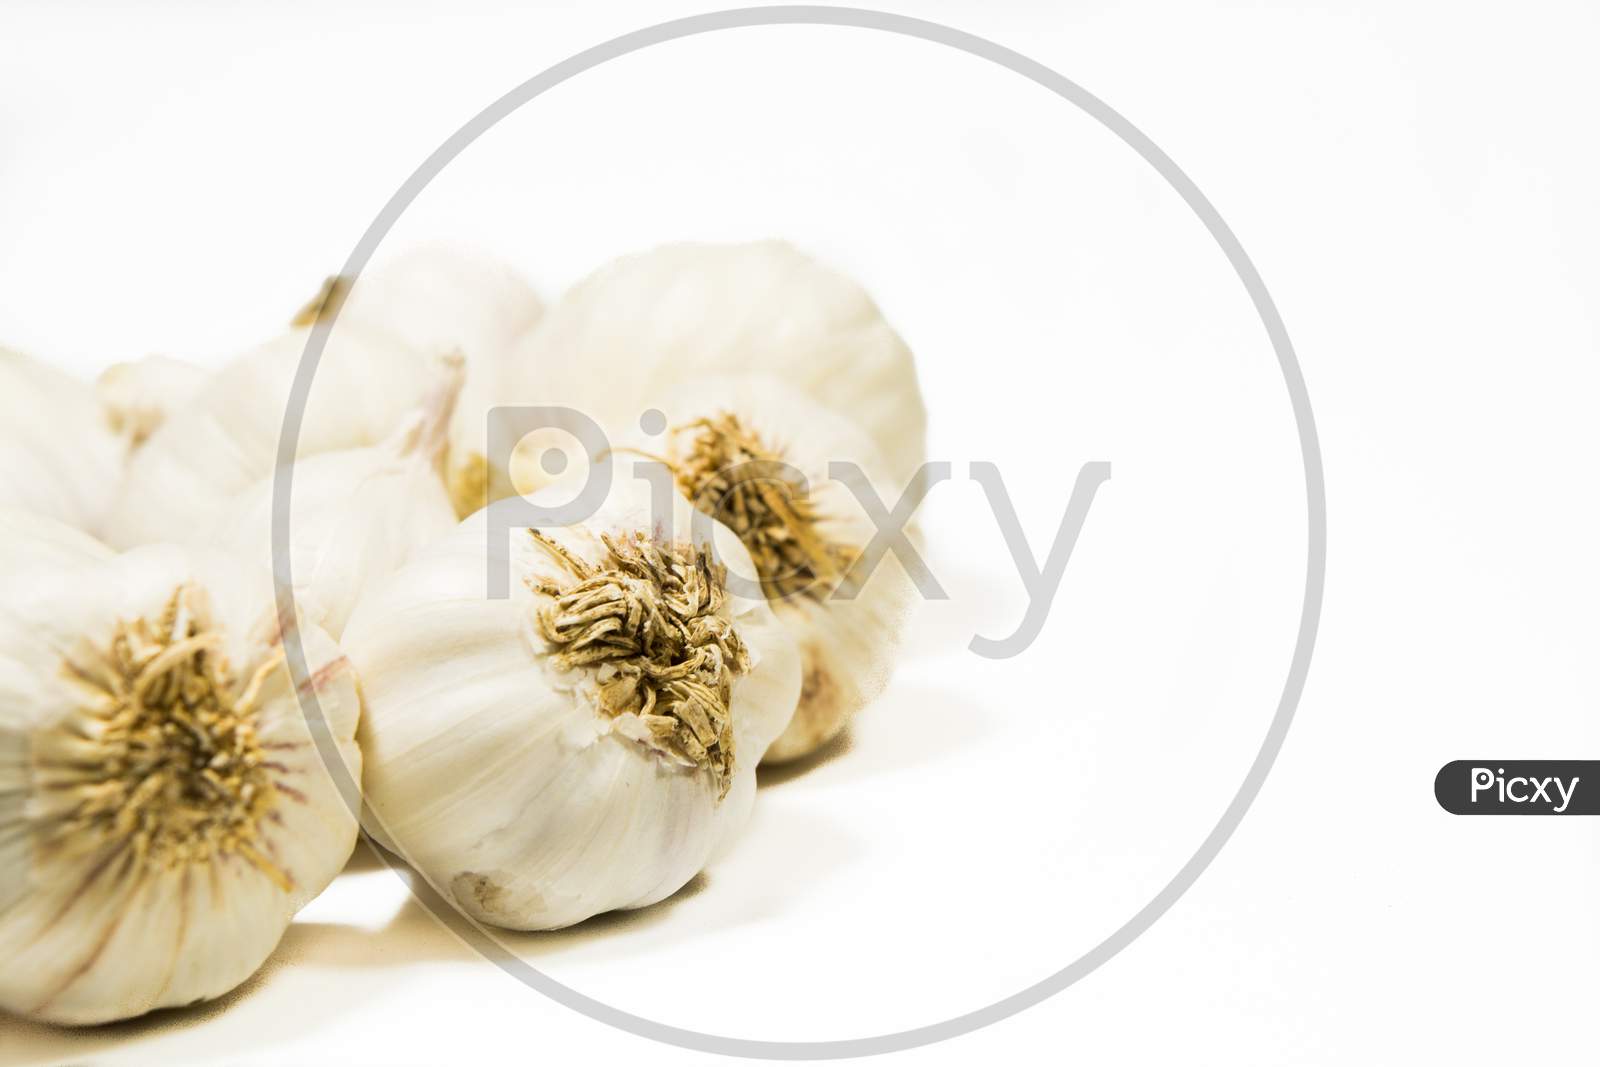 Close up shot of Garlic isolated with White Background